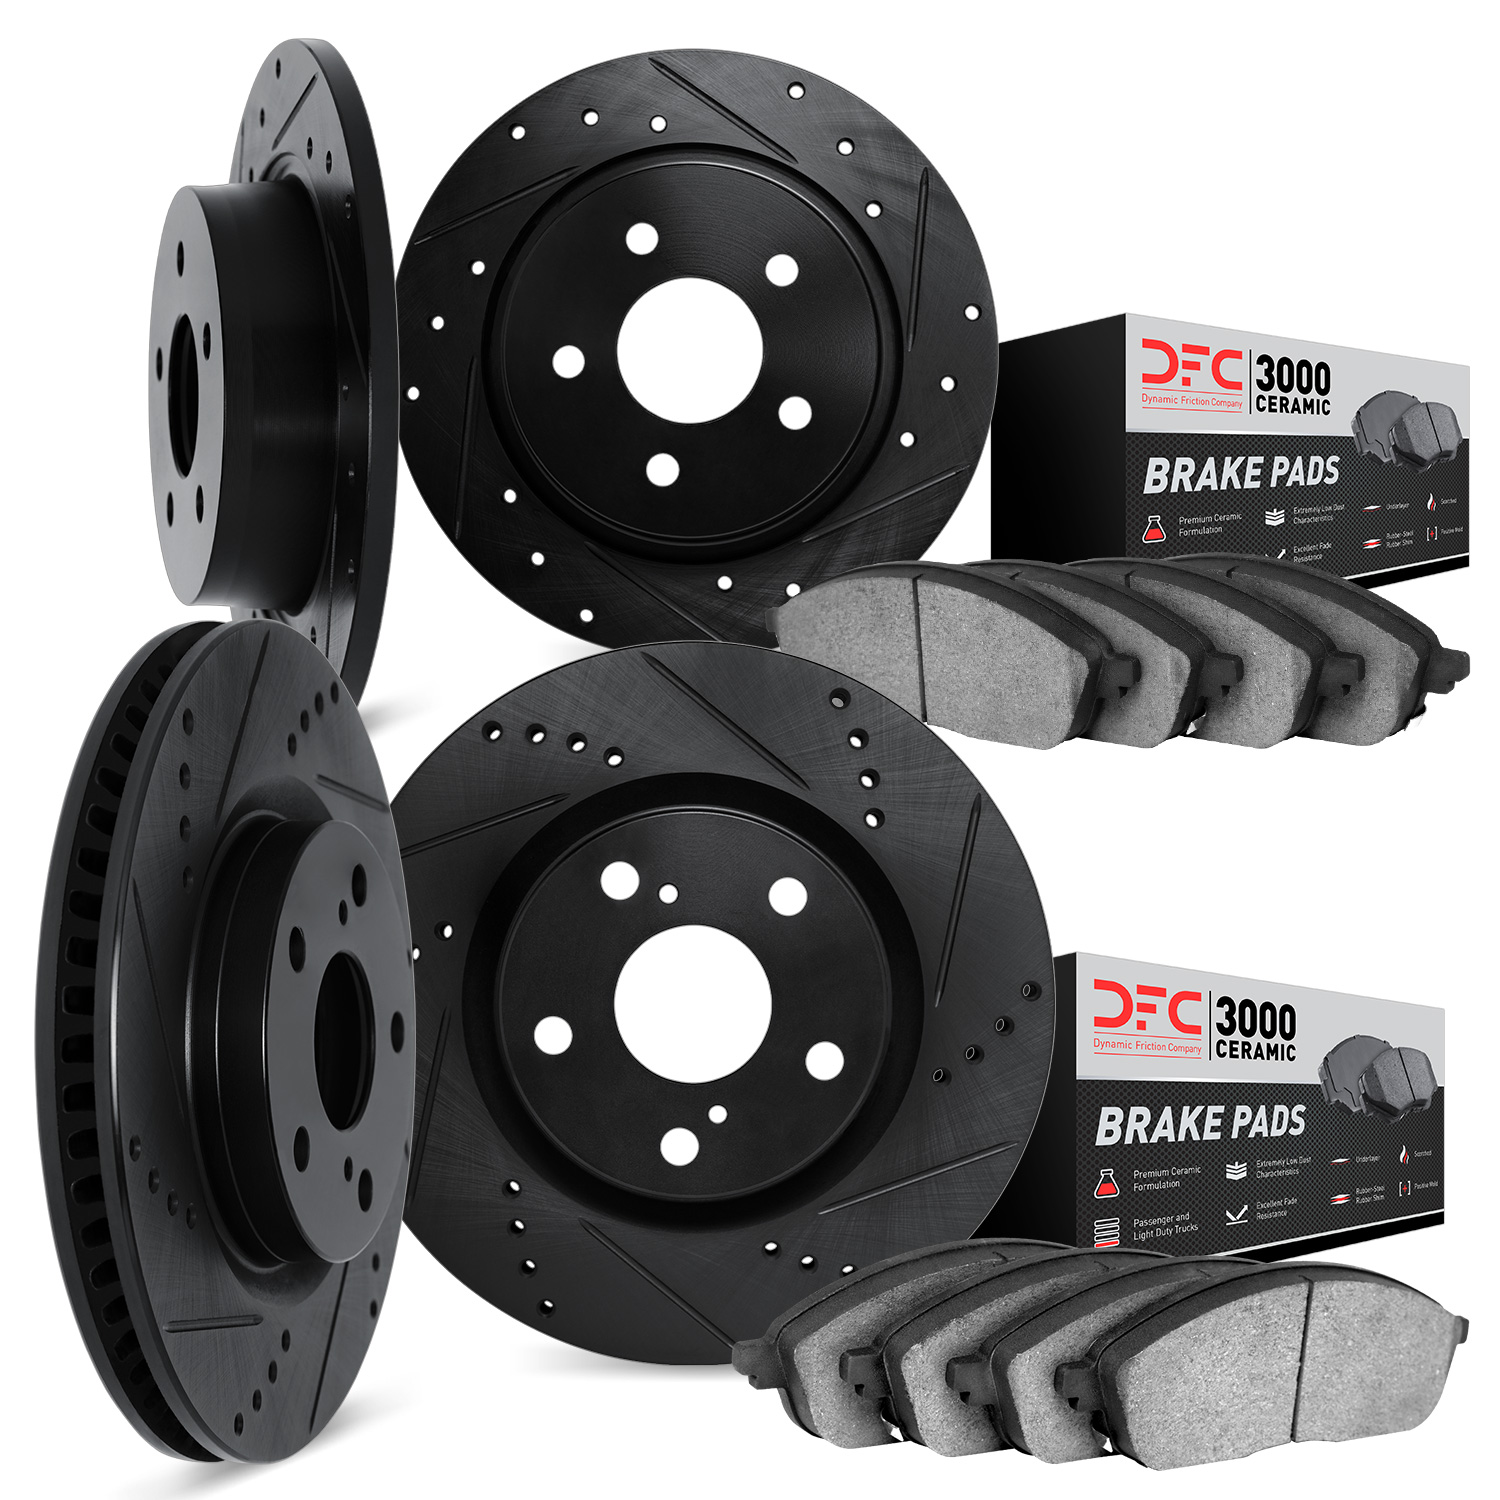 8304-72039 Drilled/Slotted Brake Rotors with 3000-Series Ceramic Brake Pads Kit [Black], 2004-2012 Mitsubishi, Position: Front a